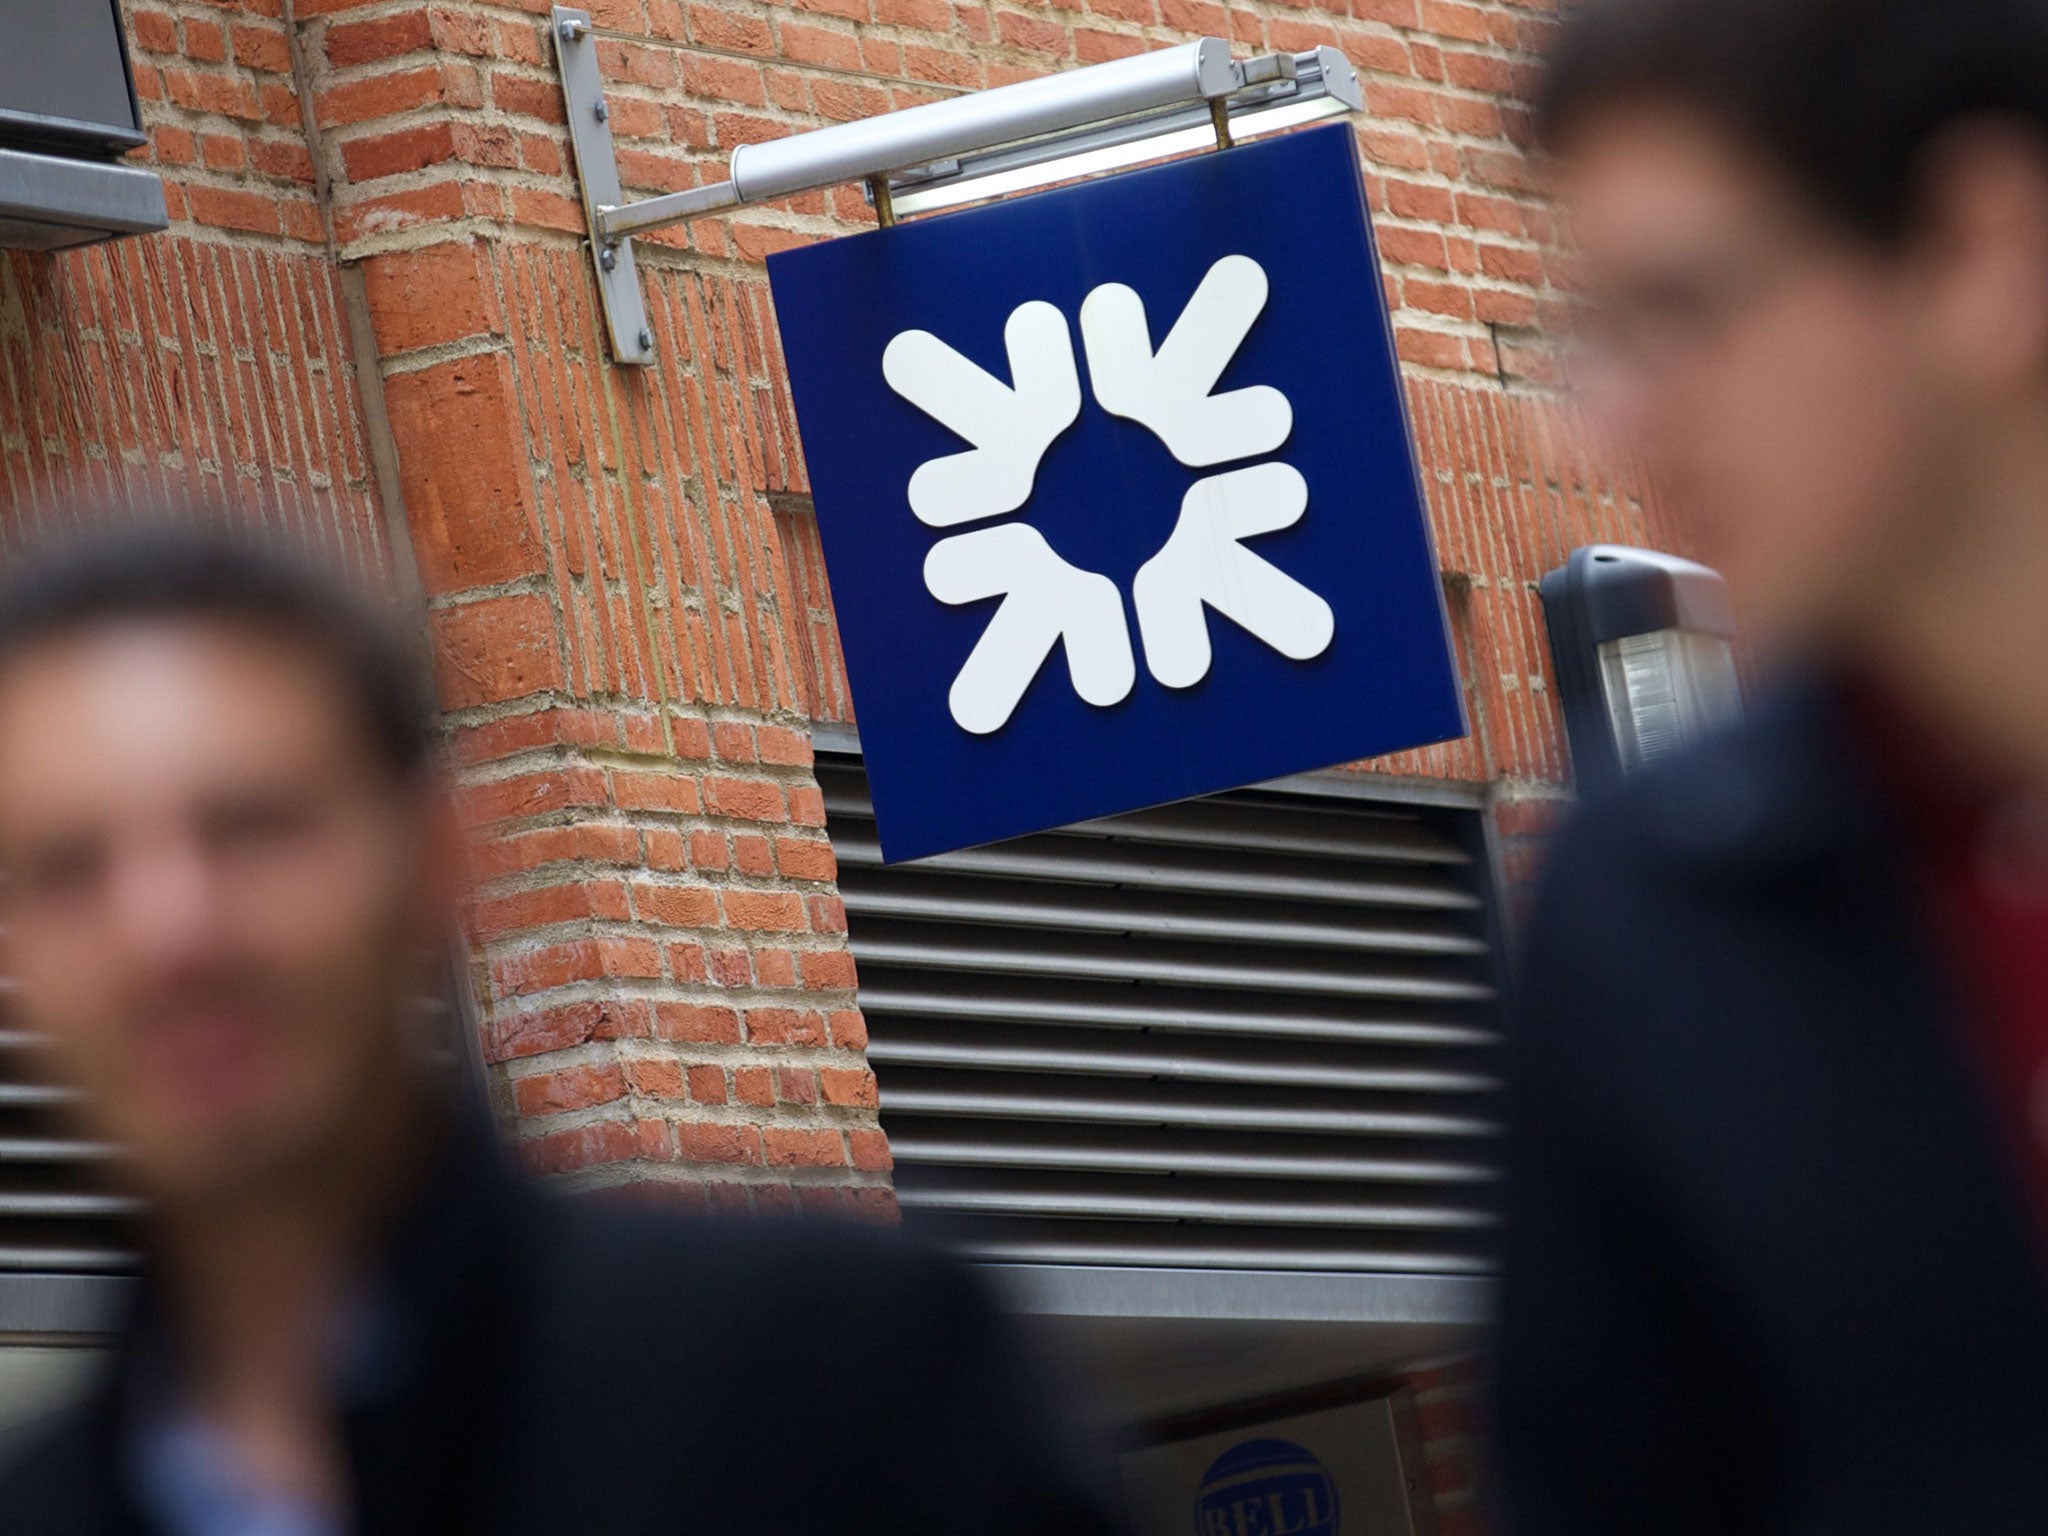 Royal Bank of Scotland made a loss of £446 million in its first quarter 